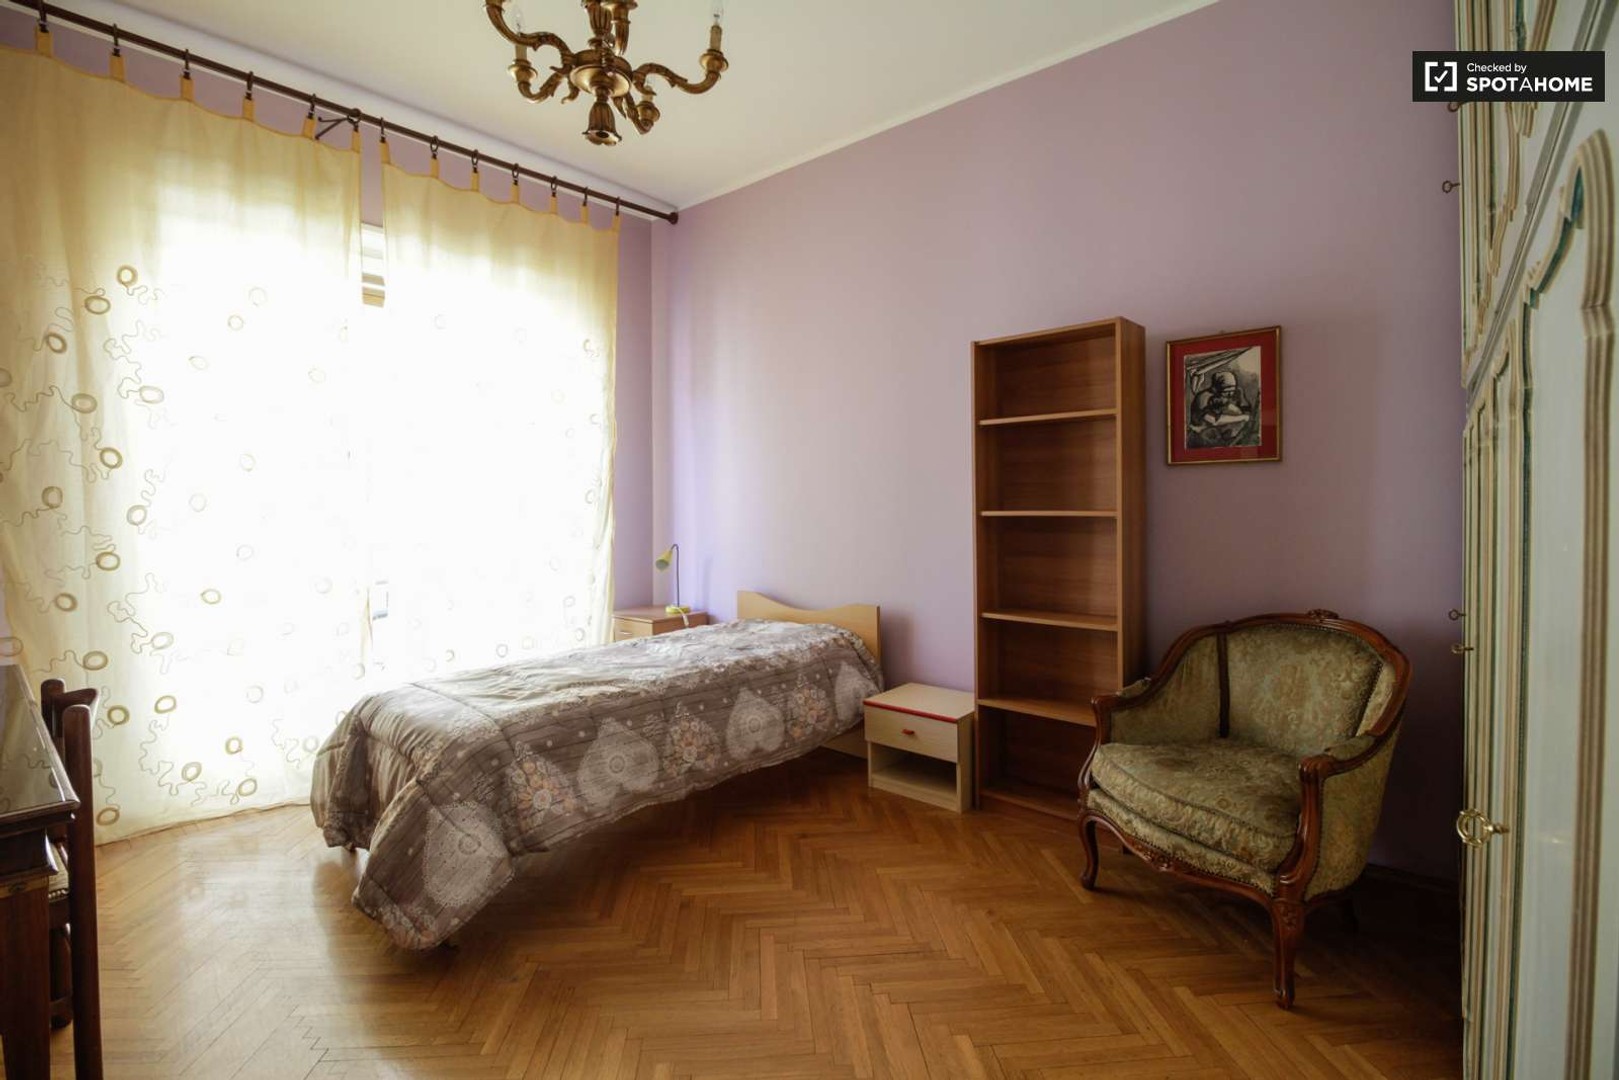 Room for rent with double bed Turin